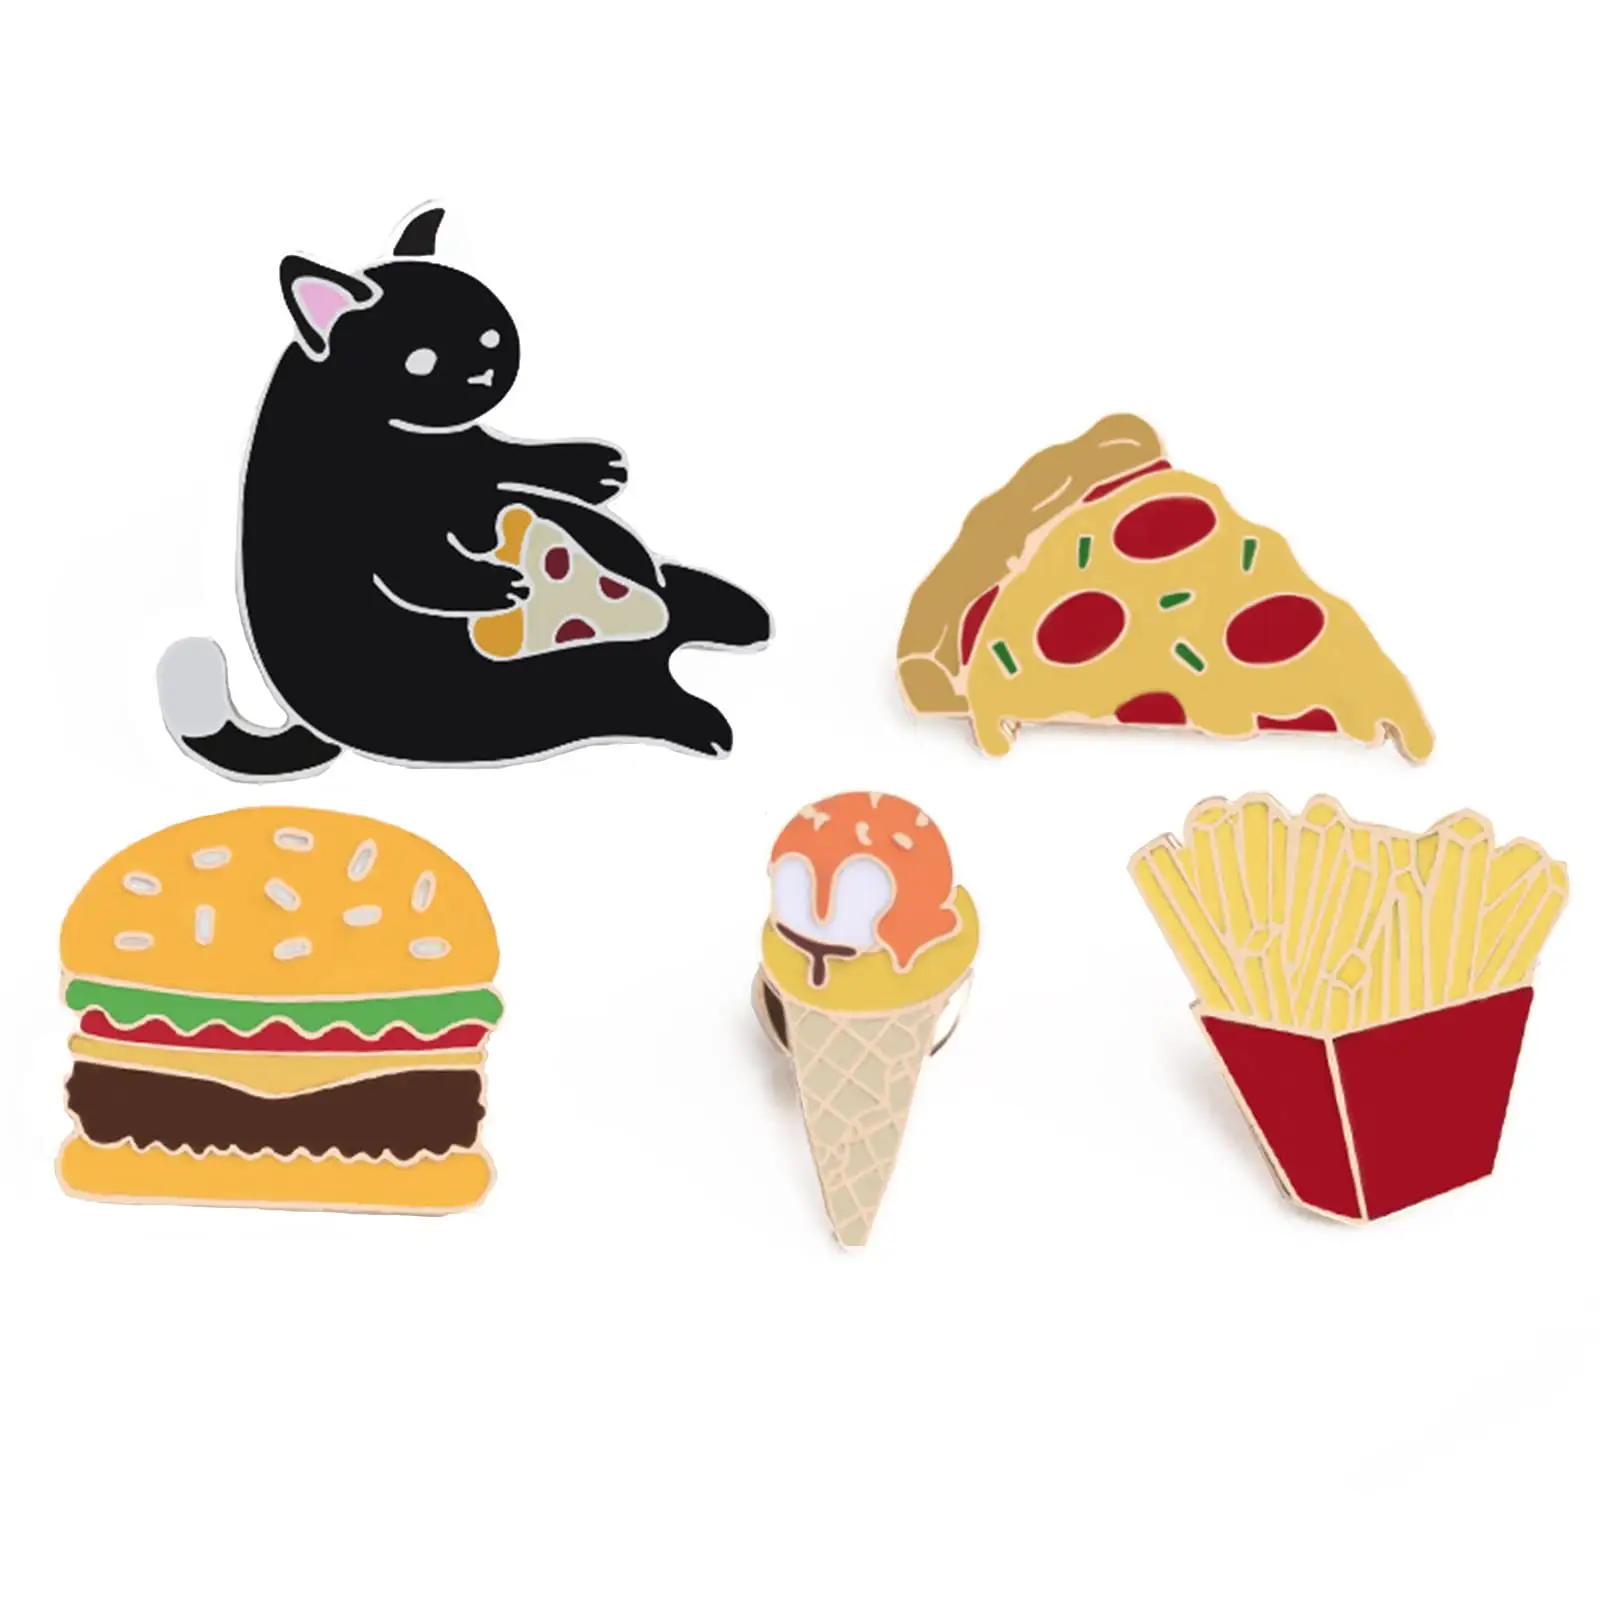 OEM Life decor enamel pins create cute food hamburger french fries pizza pin for women's clothing decorate